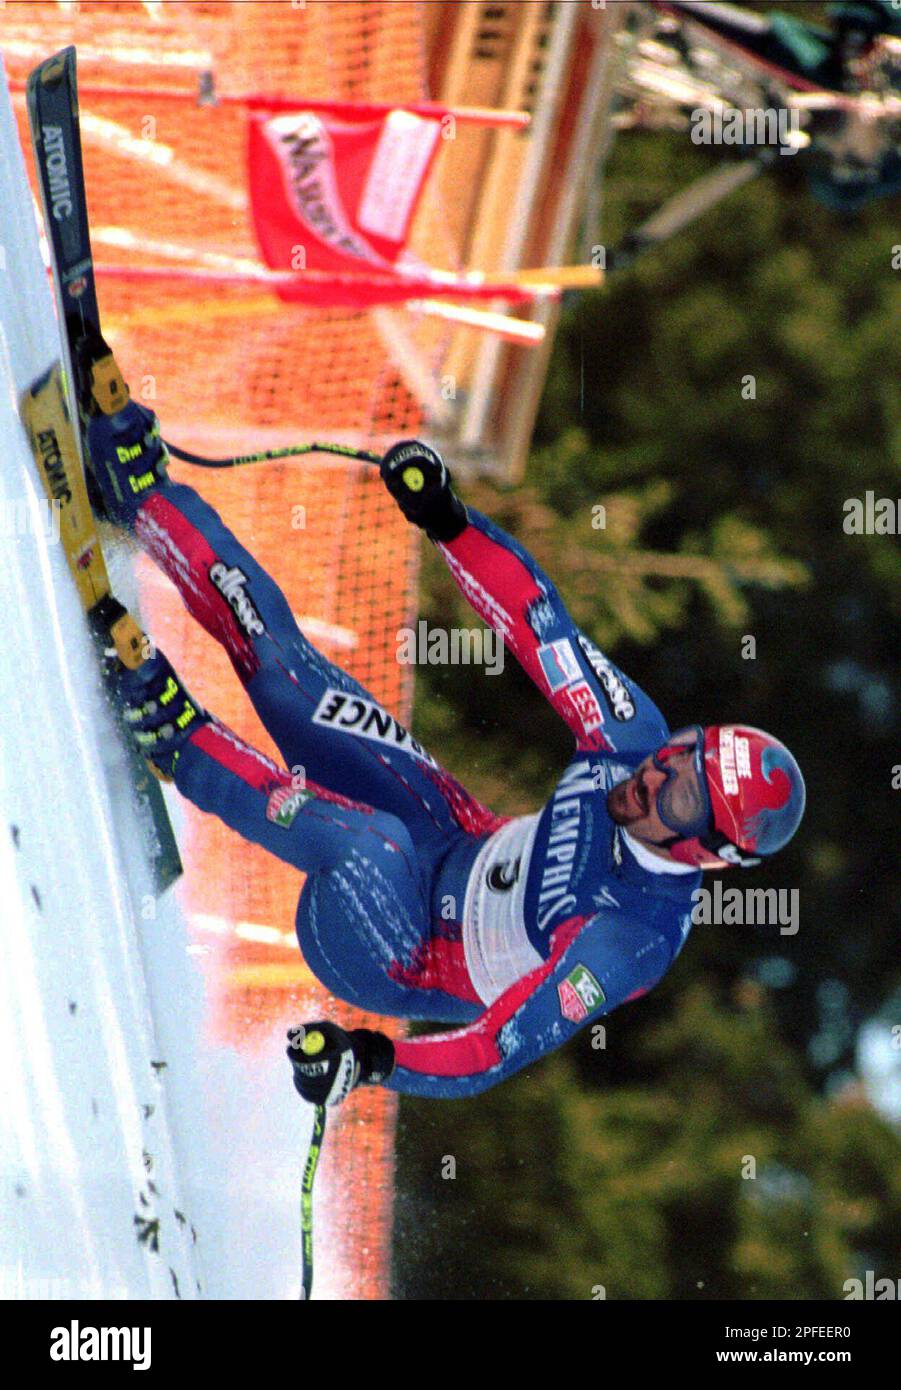 Luc Alphand, of France, speeds down the track to win the men's World Cup  Super-G ski race, in Laax, Switzerland, Wendsday, January 29, 1997. (AP  Photo Stock Photo - Alamy